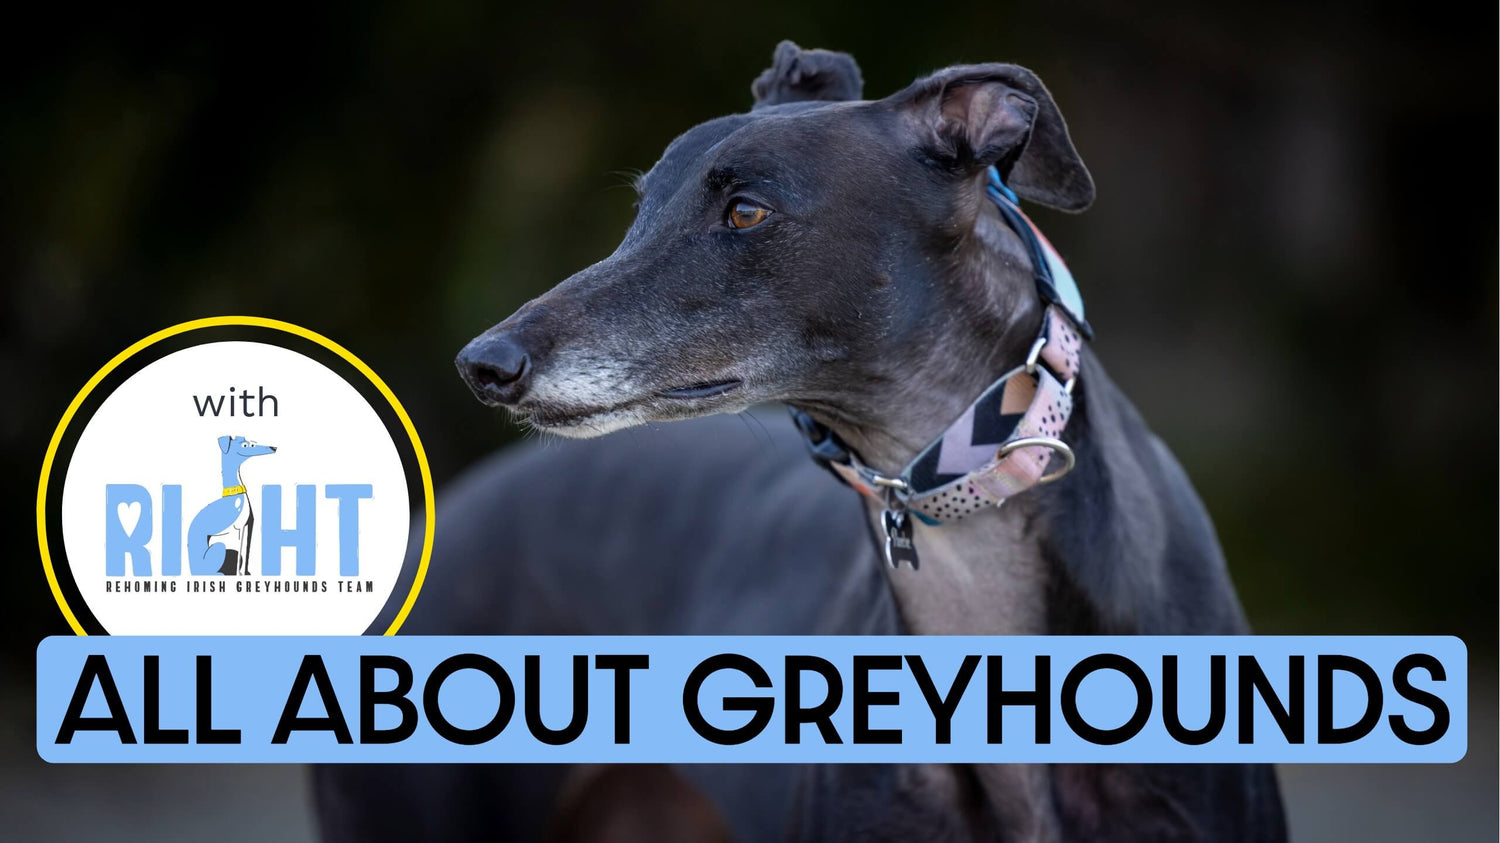 A black greyhound in front of a blurry background looking to the left and a box with text “All about greyhounds”